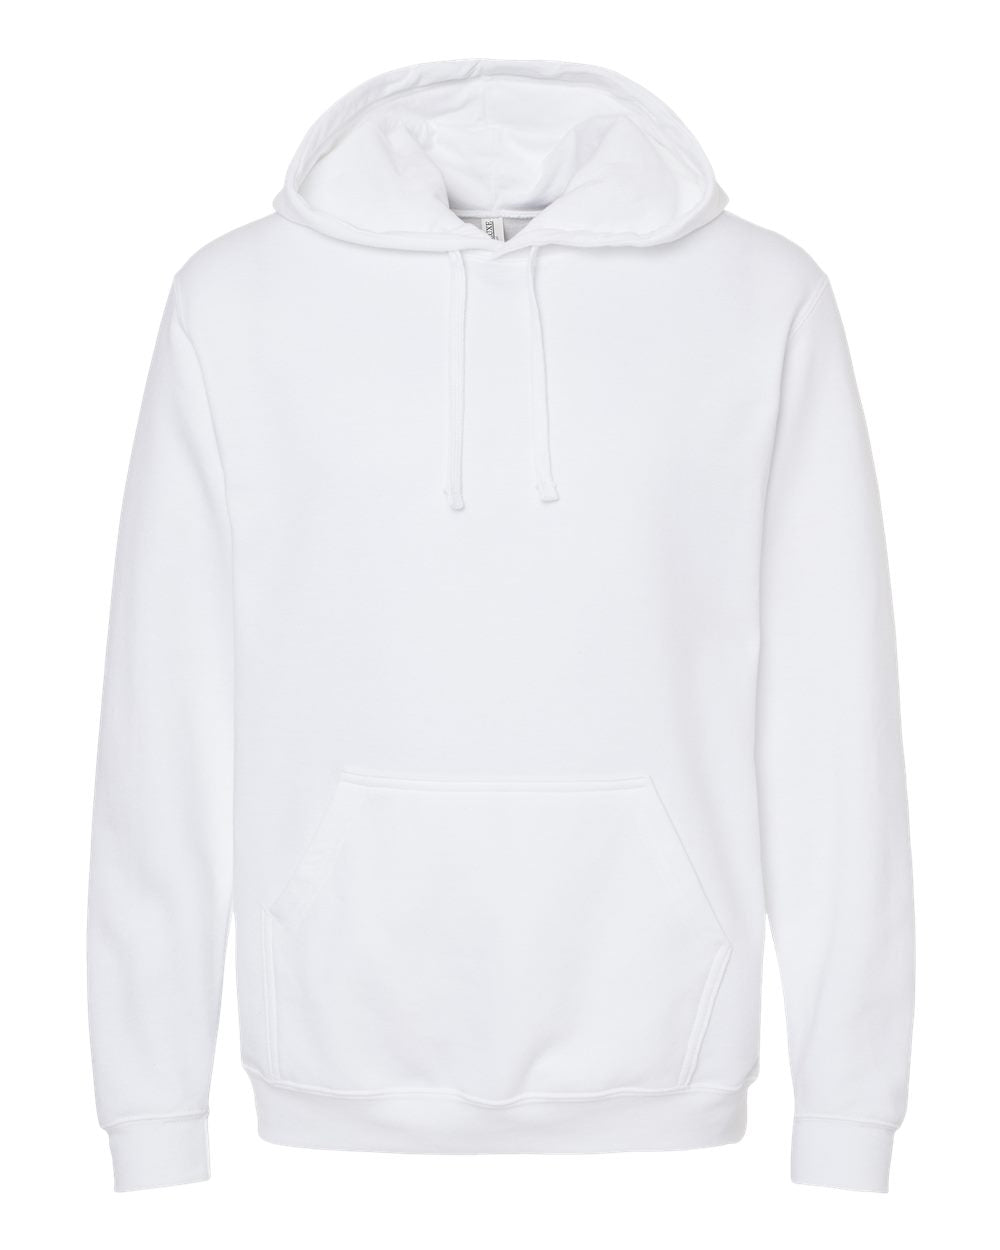 M&O Unisex Pullover Hoodie 3320 #color_White